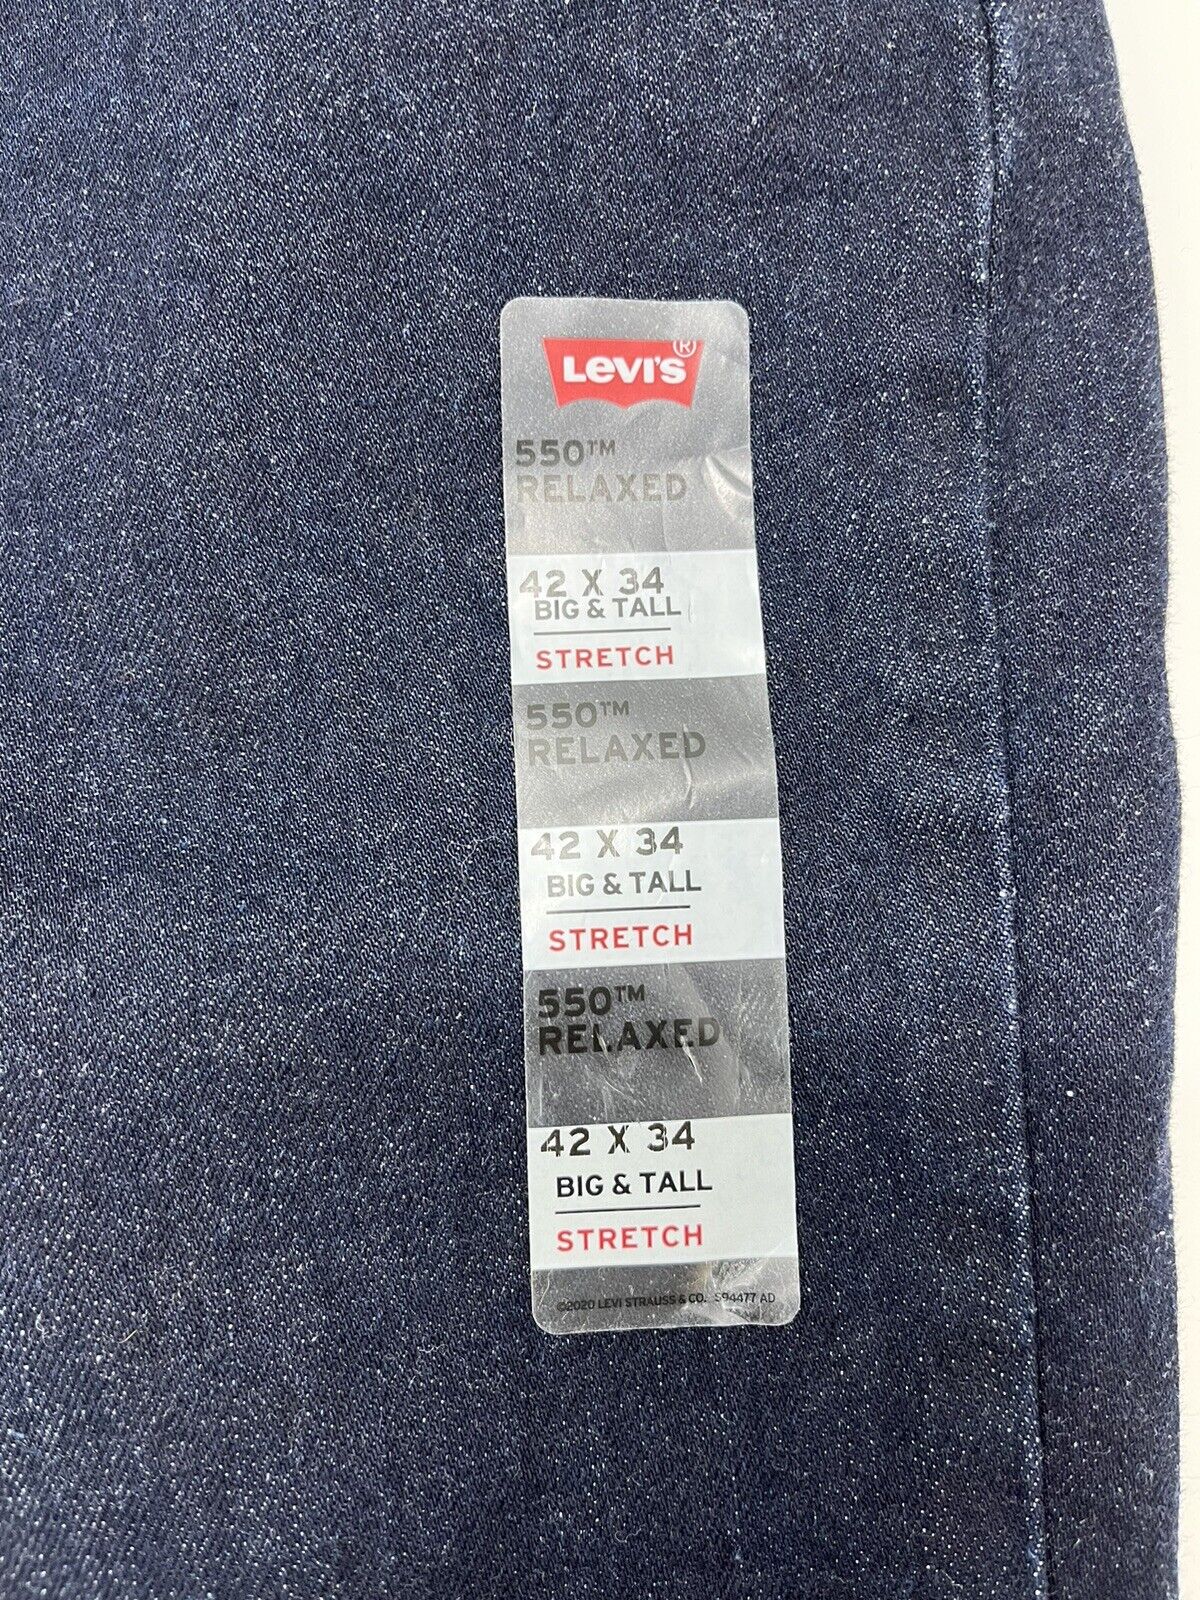 Levi's Men's Big and Tall 550 Relaxed Fit Jean, Rinse - Stretch, 42W x 34L